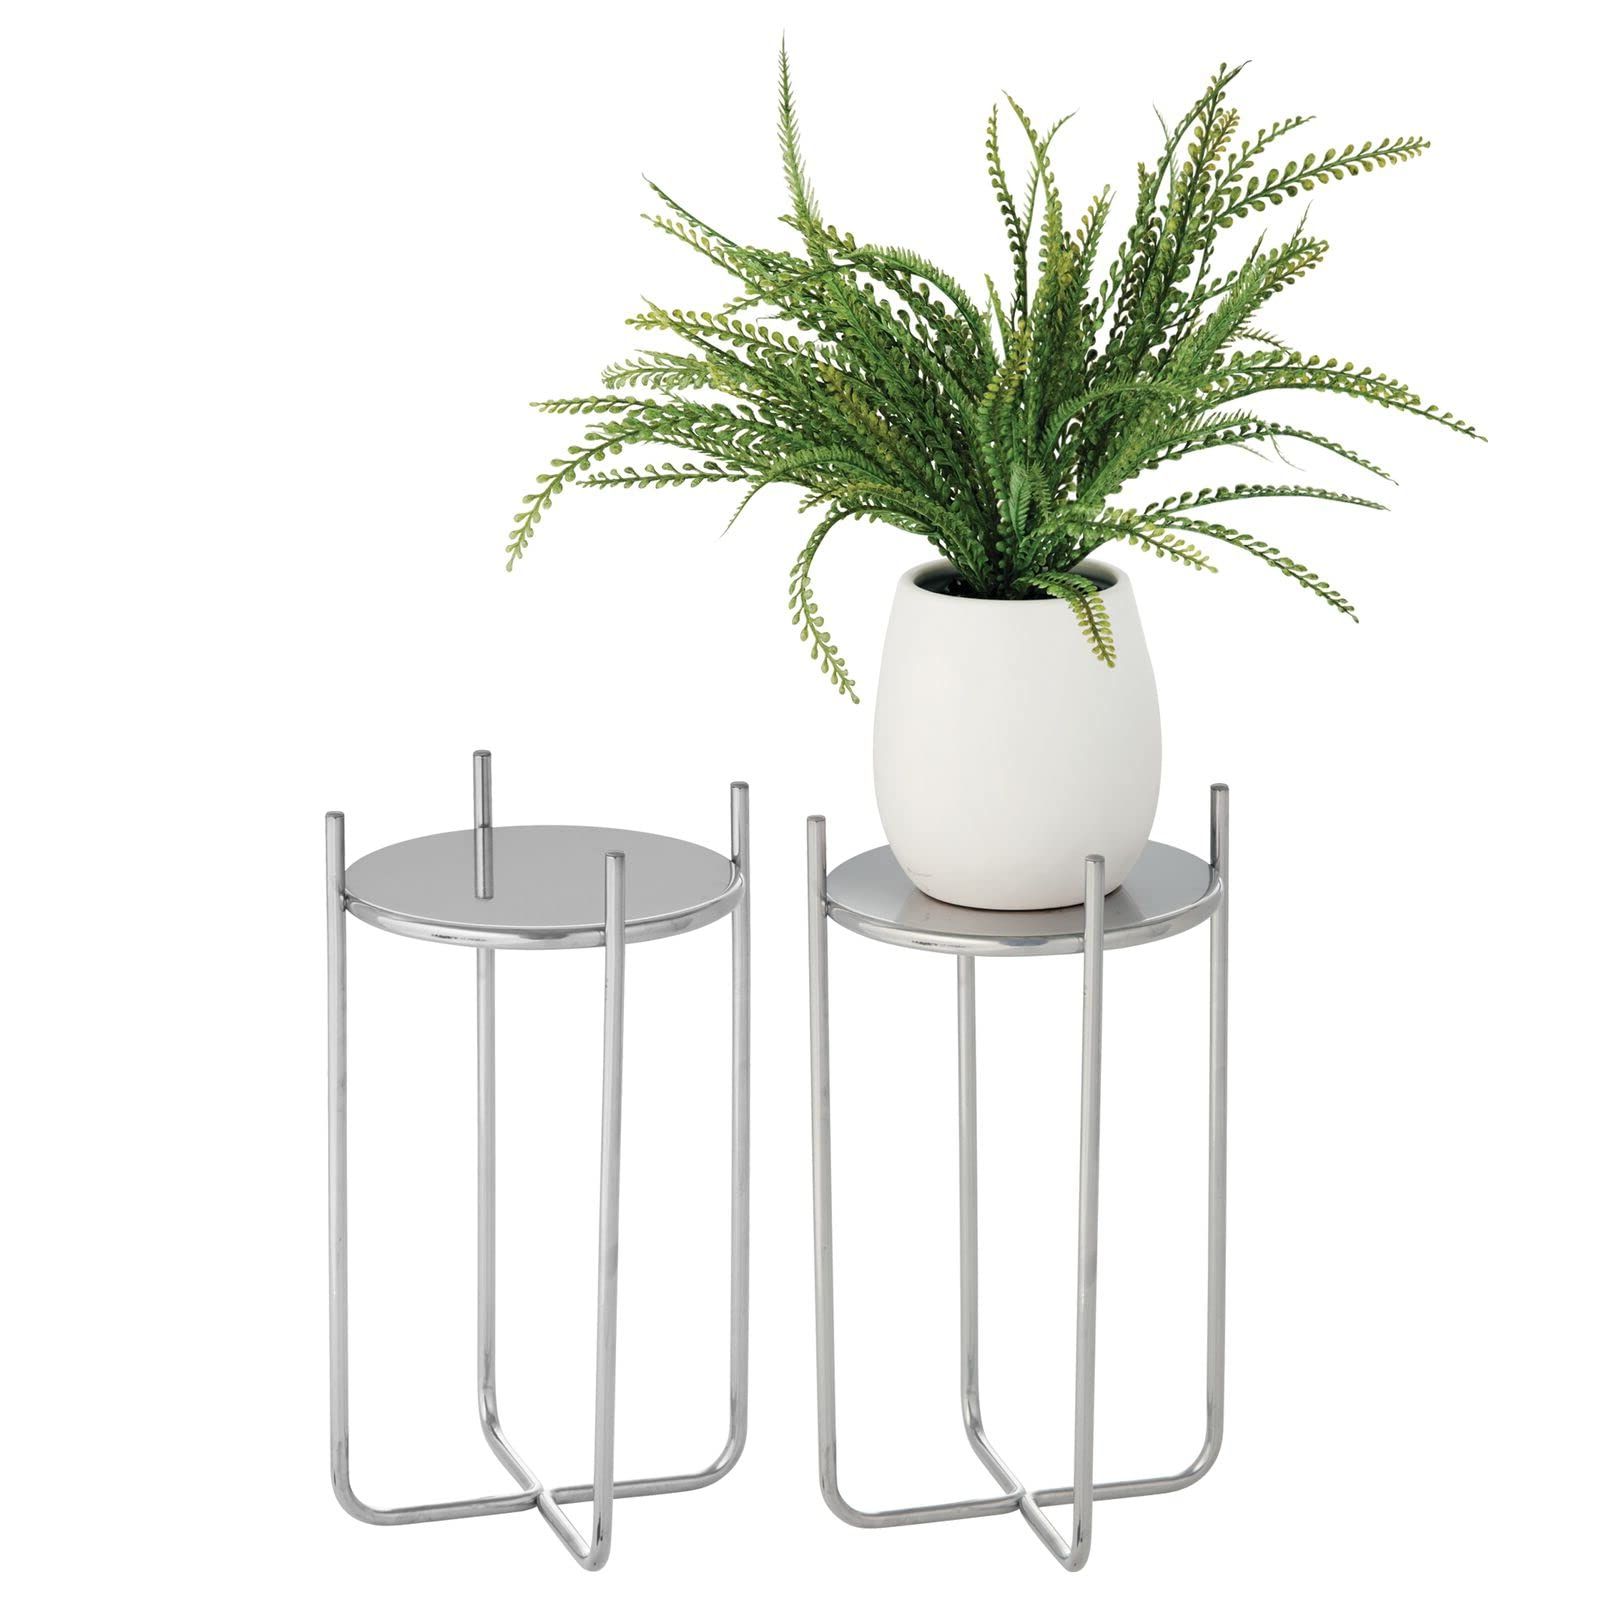 Newest 15 Inch Plant Stands Throughout Amazon: Mdesign Metal Steel Modern 15 Inch Tall Plant Stand, Planter  Holder, W/modern Crisscross Design For Table, Floor; Holds Indoor/outdoor  Plants, Flower Pot – Omni Collection – 2 Pack – Chrome : (View 5 of 10)